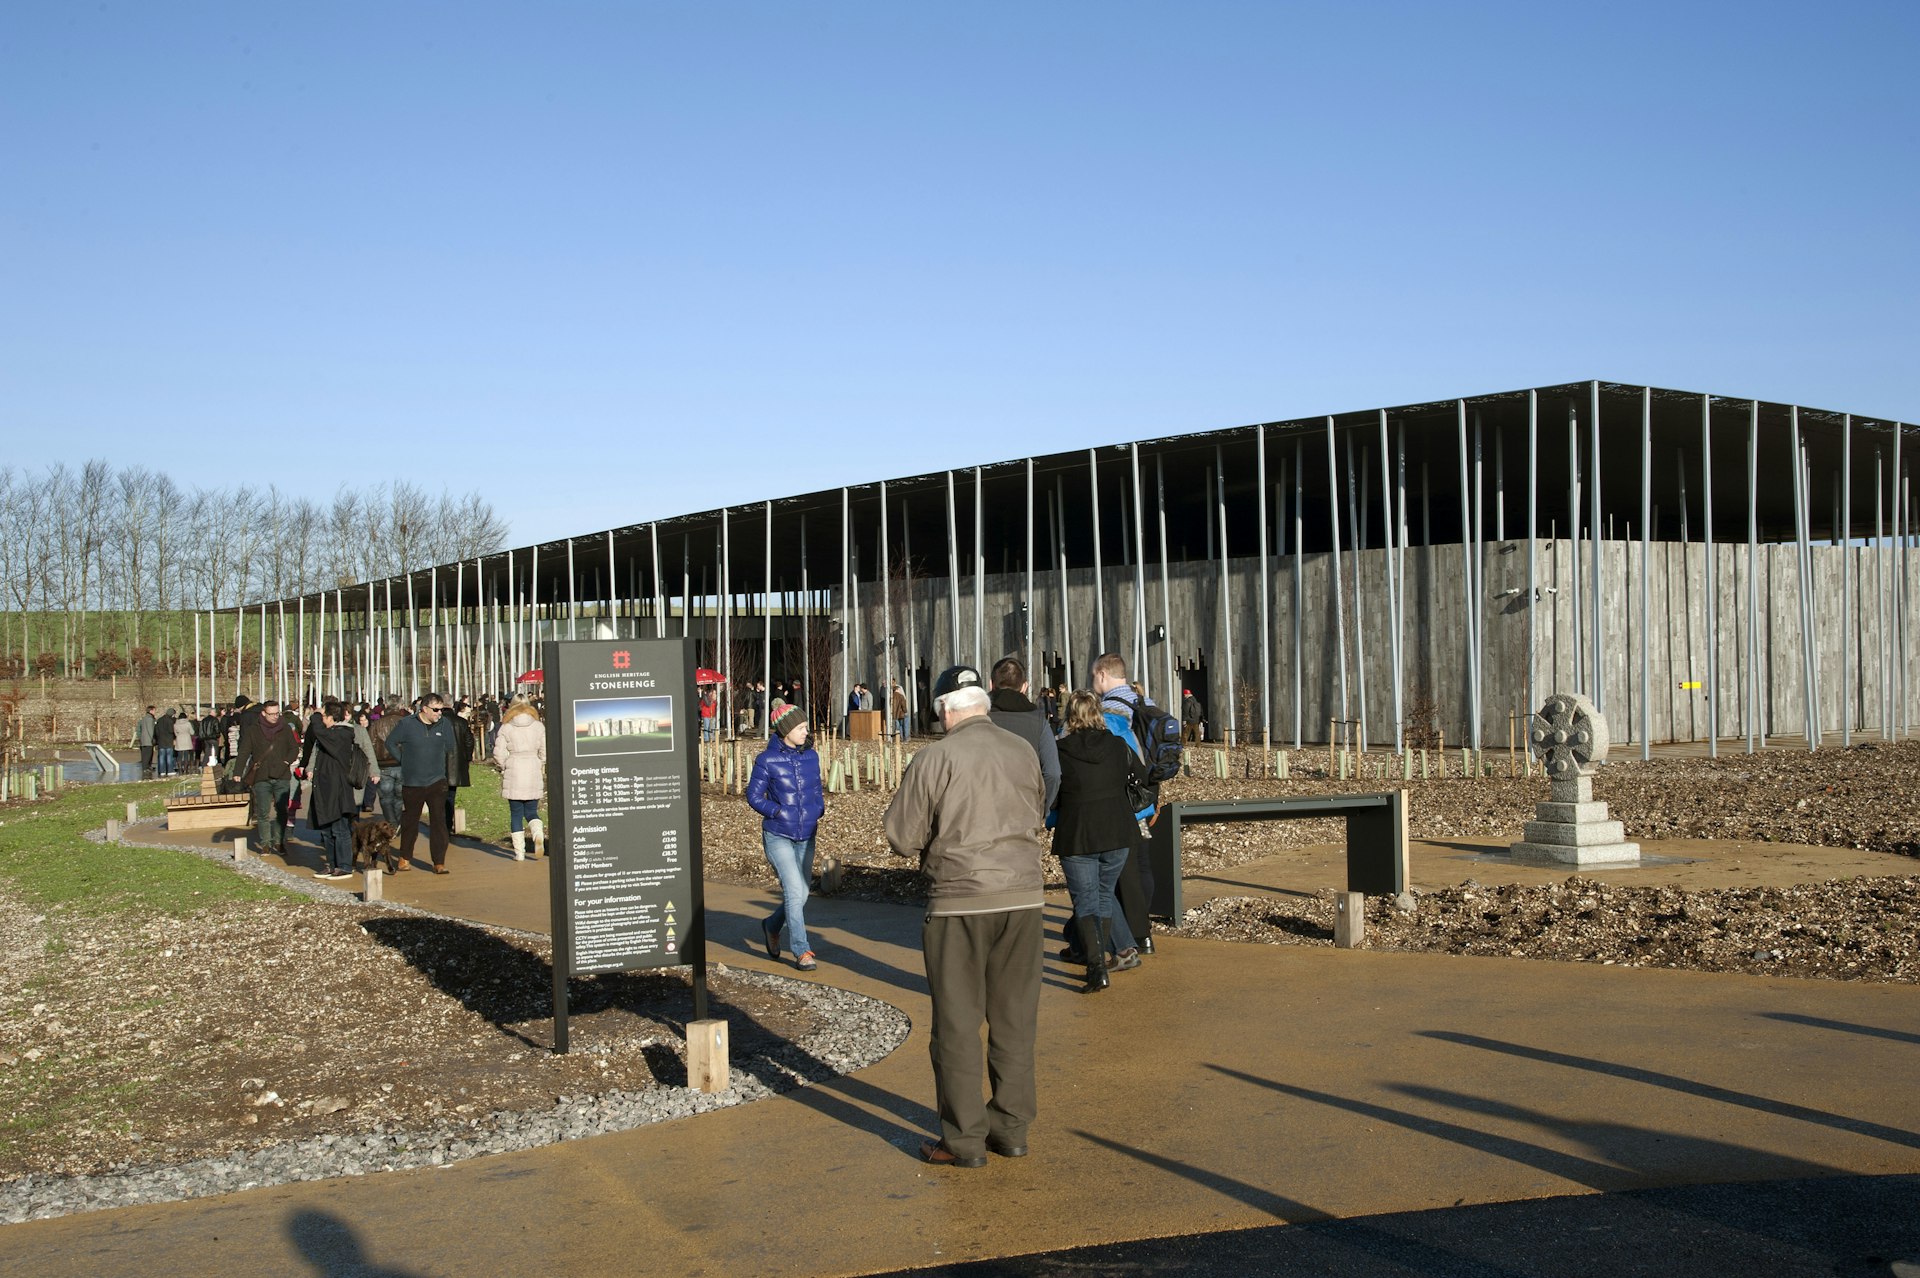 Visitors approach the large Visitor Center at Stonehenge